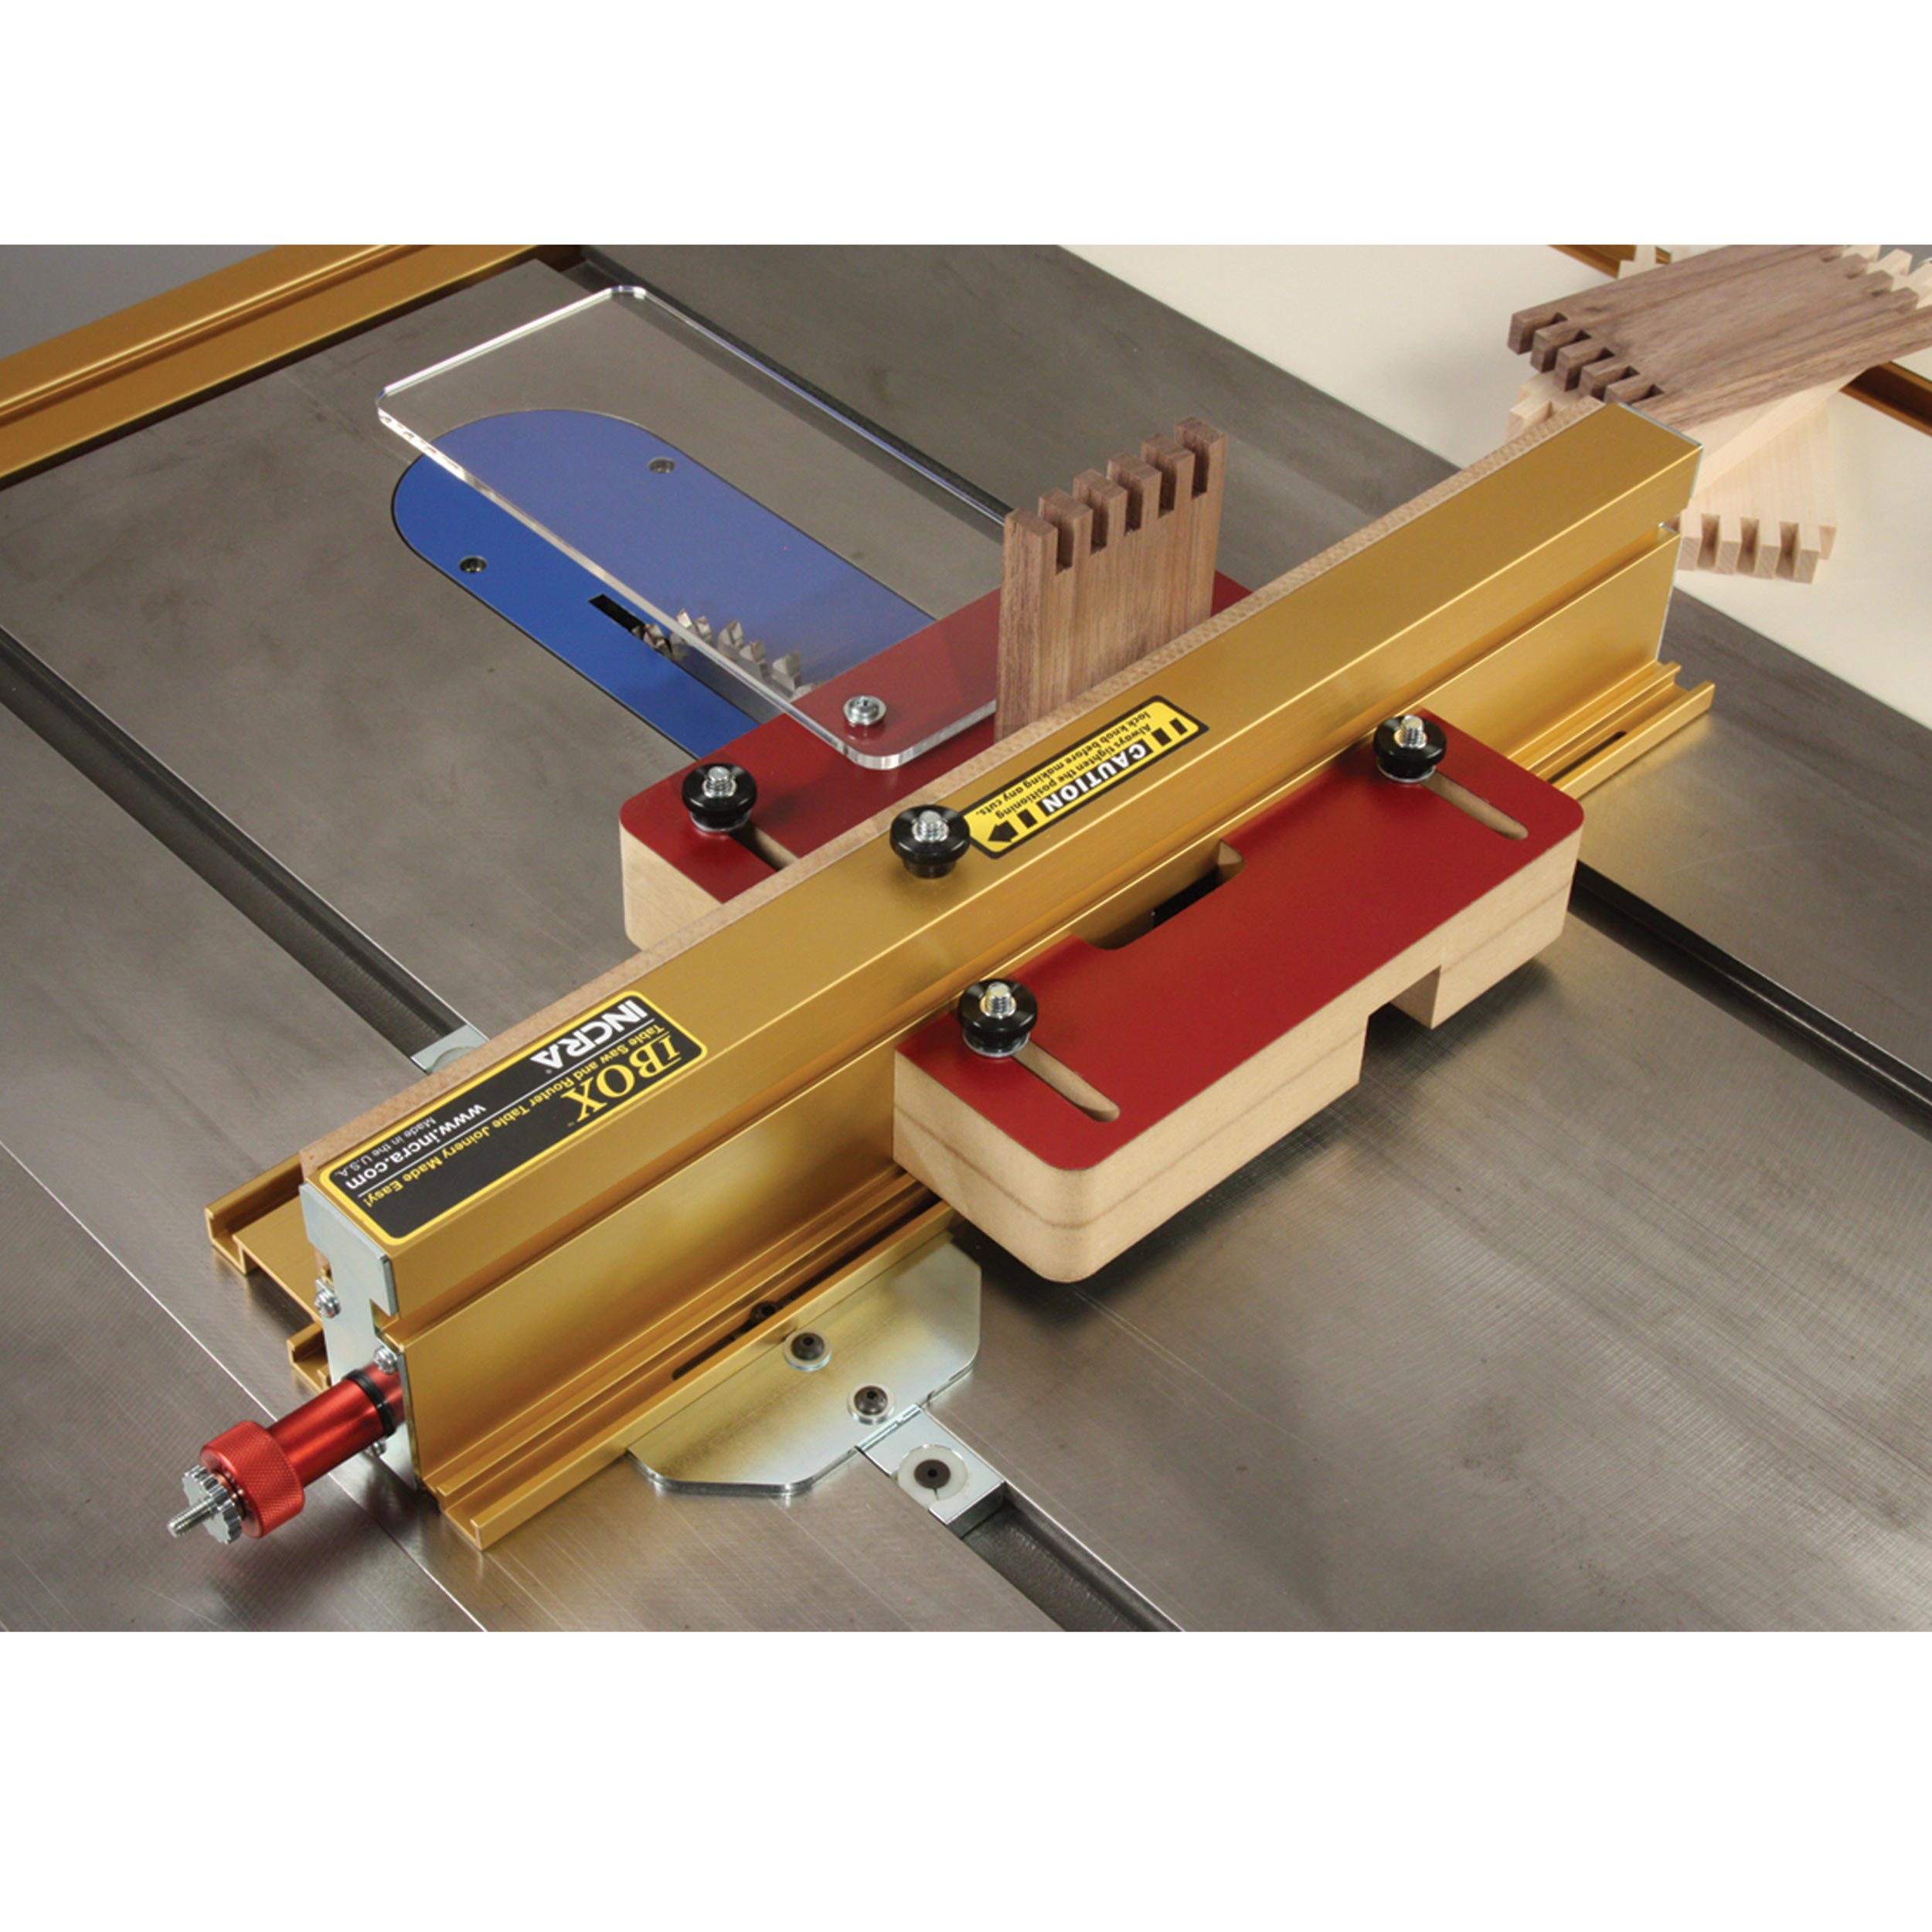 Ibox Jig For Box Joints, Model# Ibox